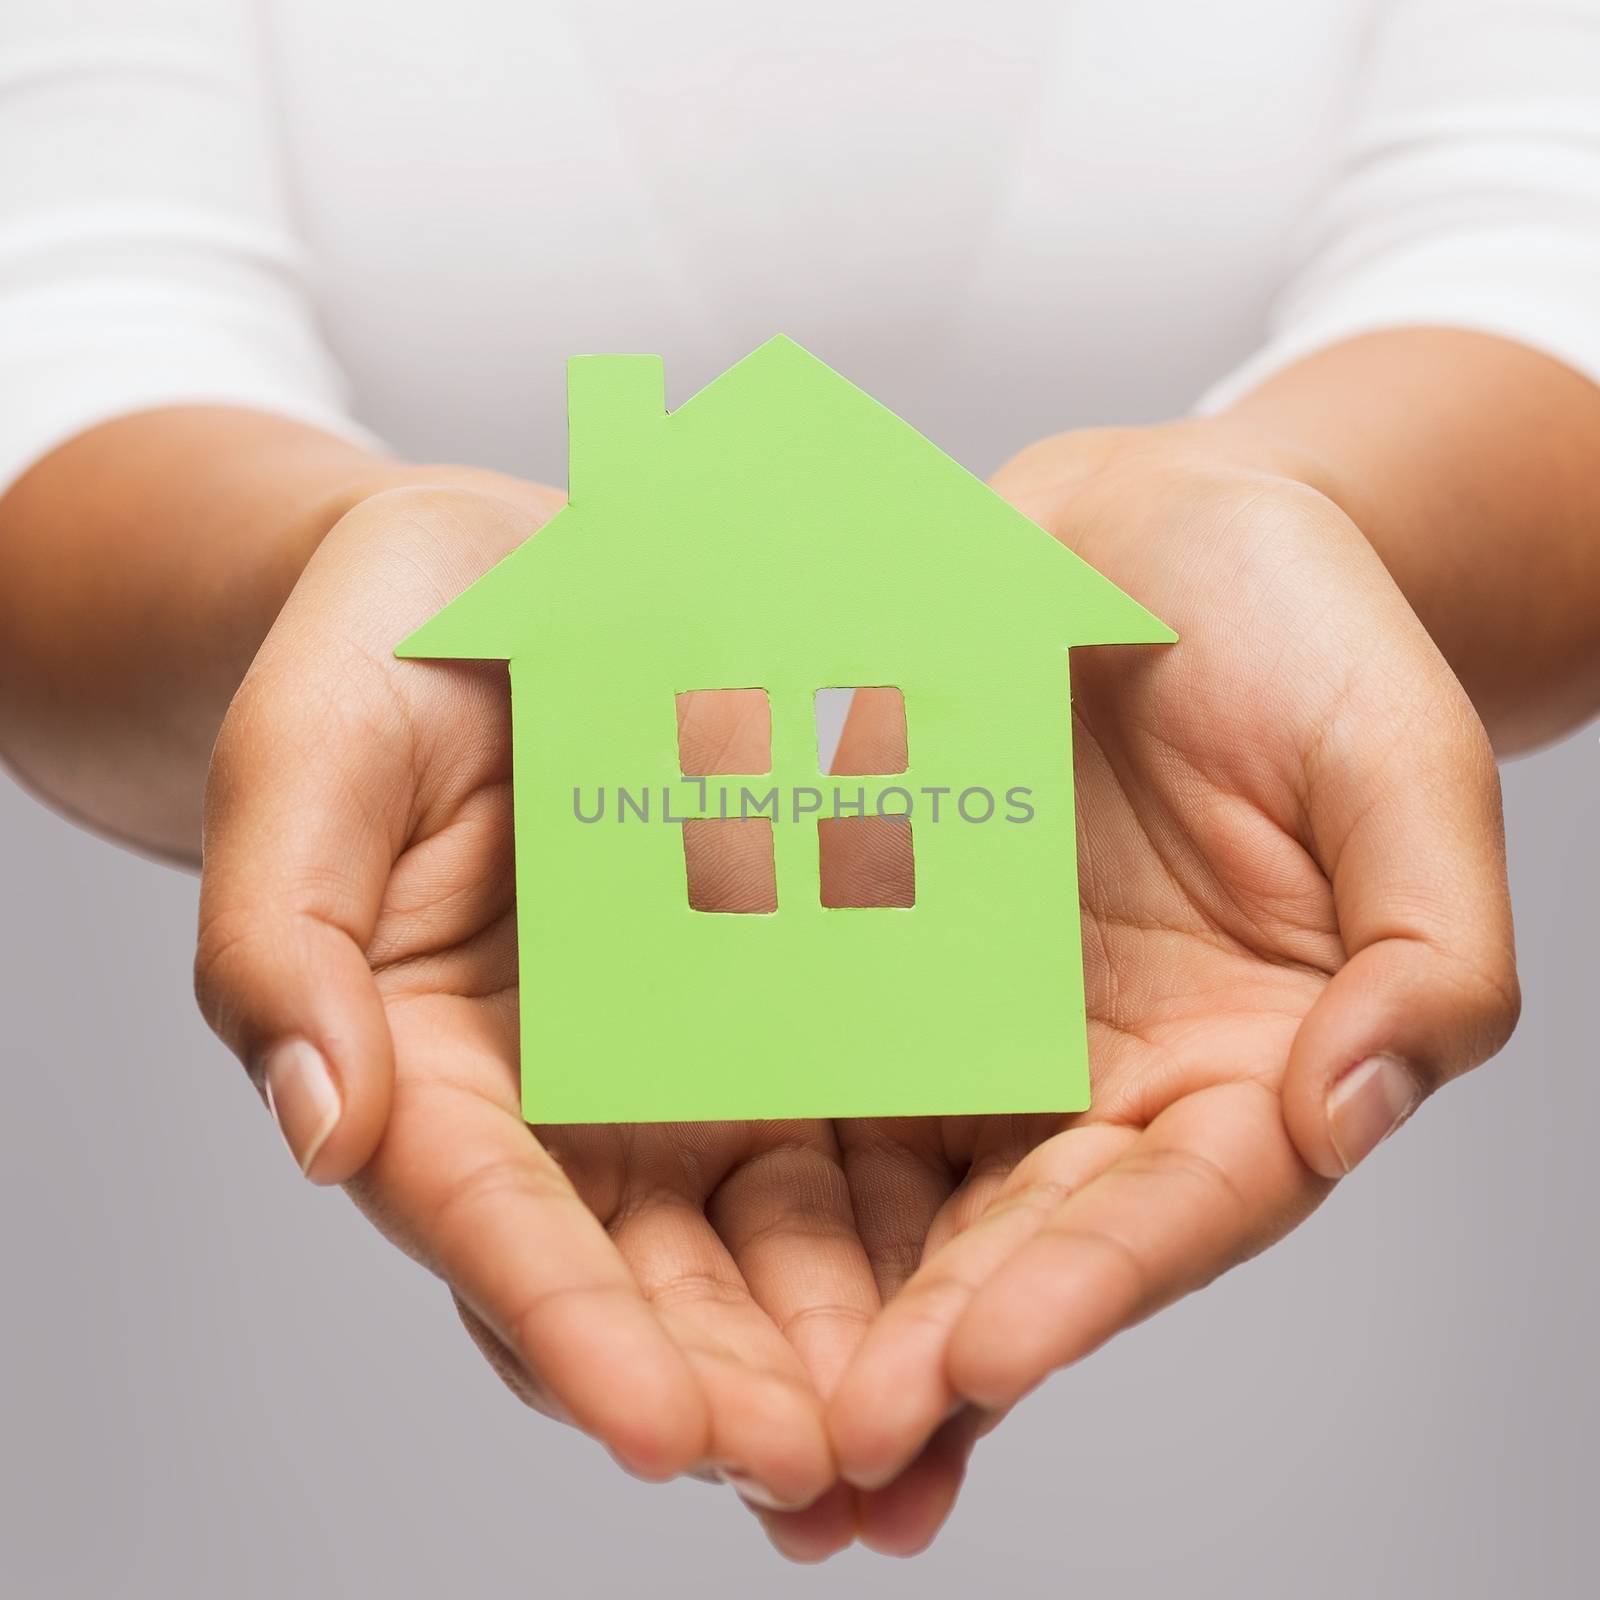 real estate and eco concept - closeup picture of woman hands holding green house